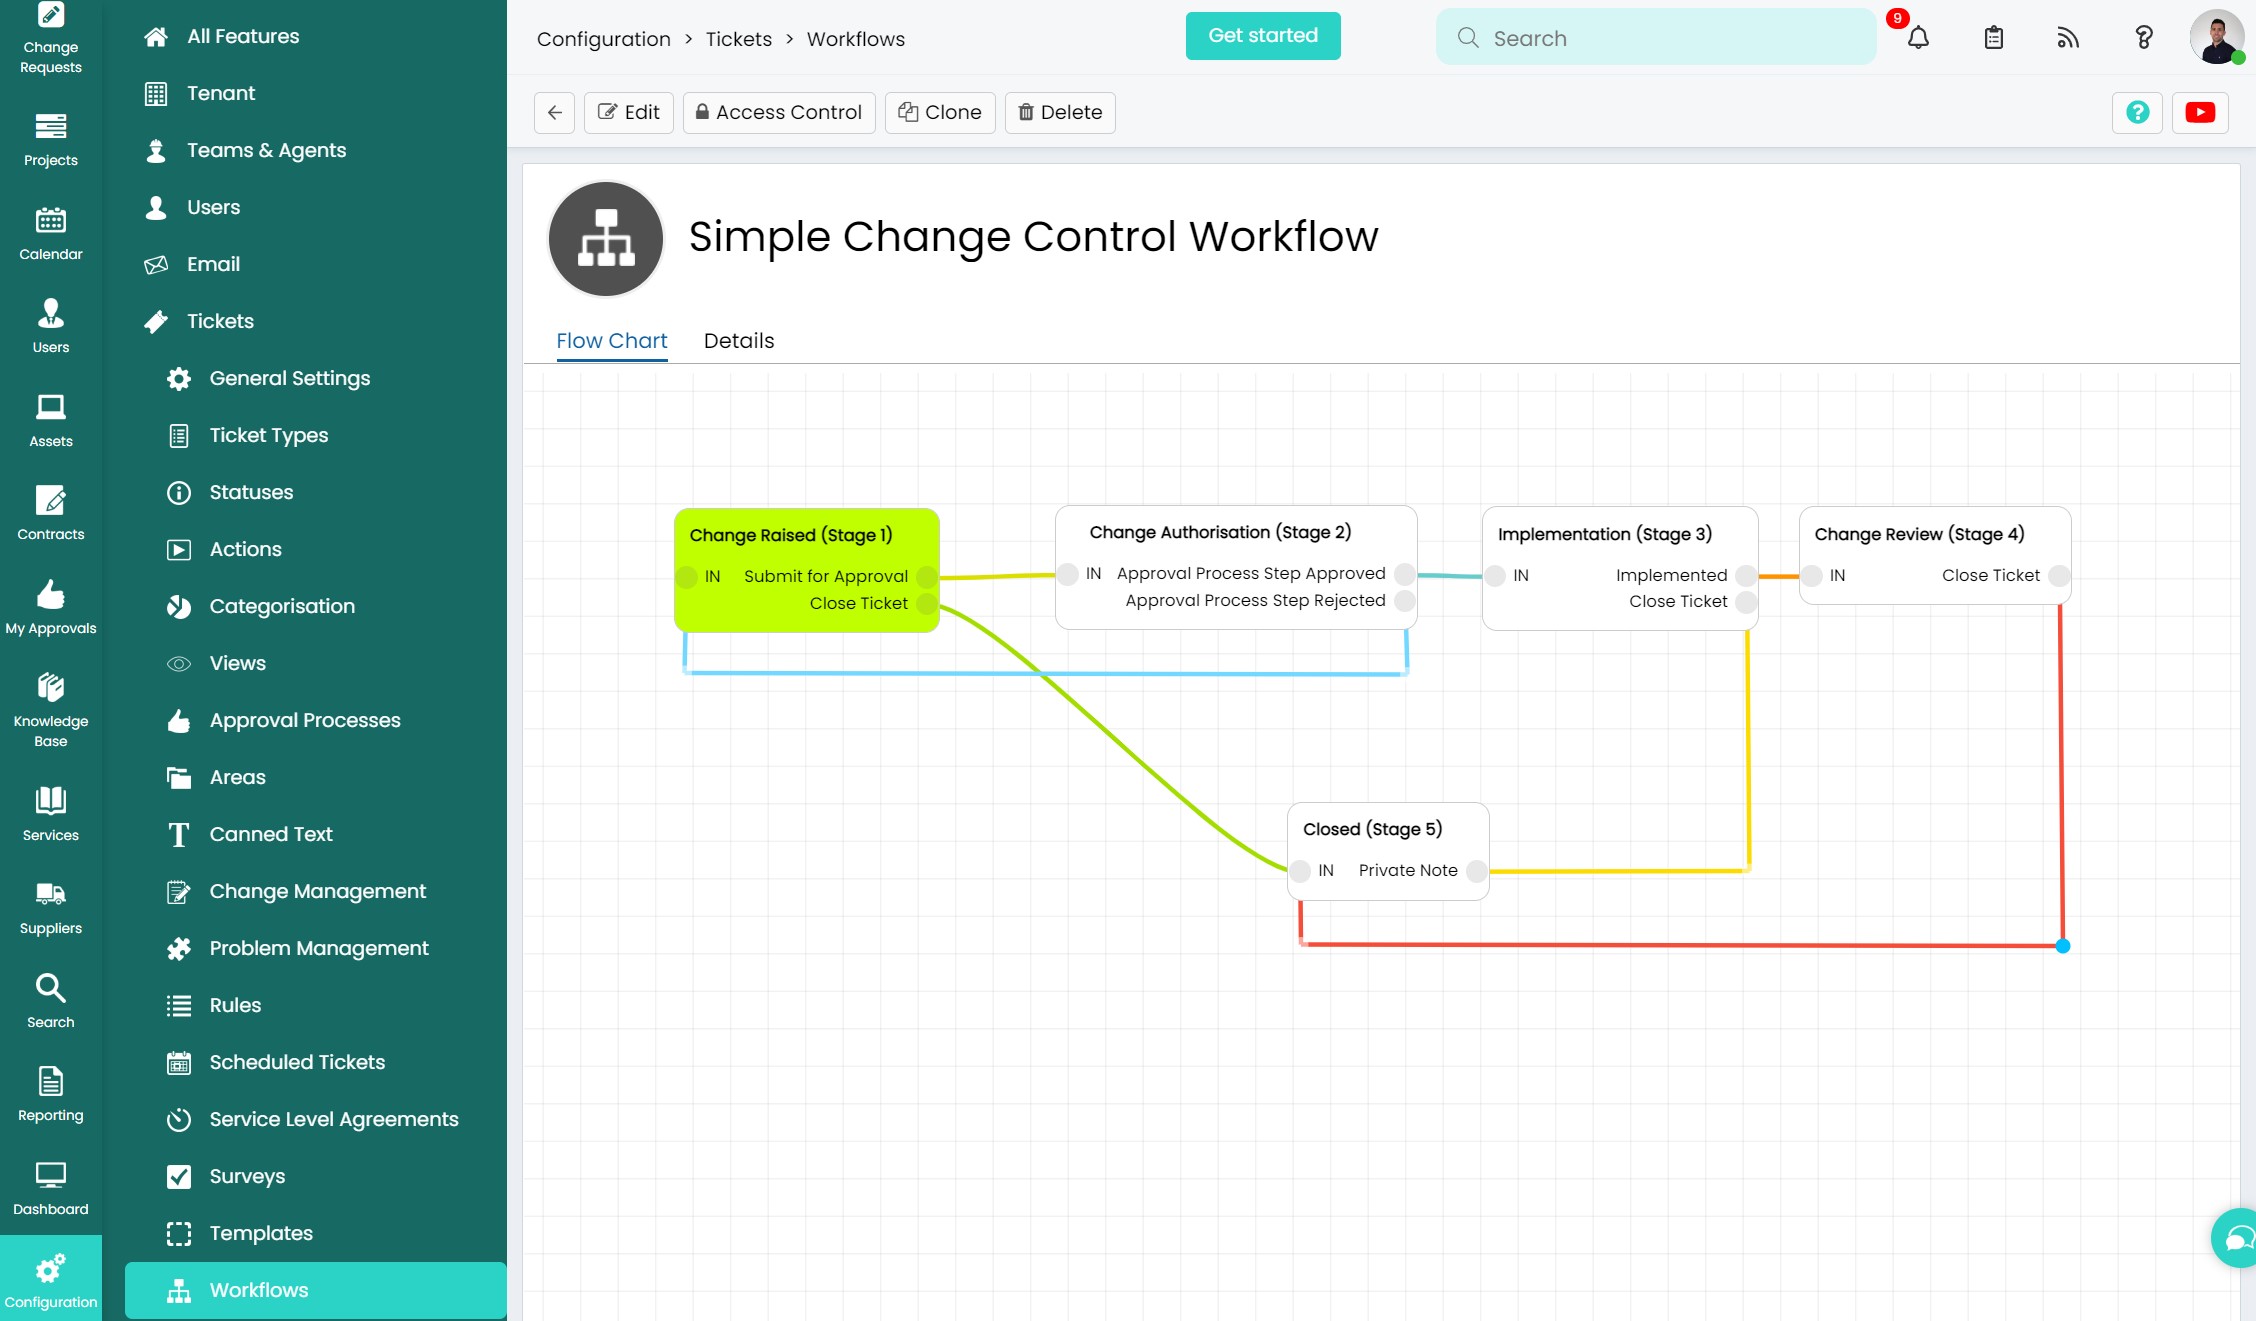 Simple Change Control Workflow